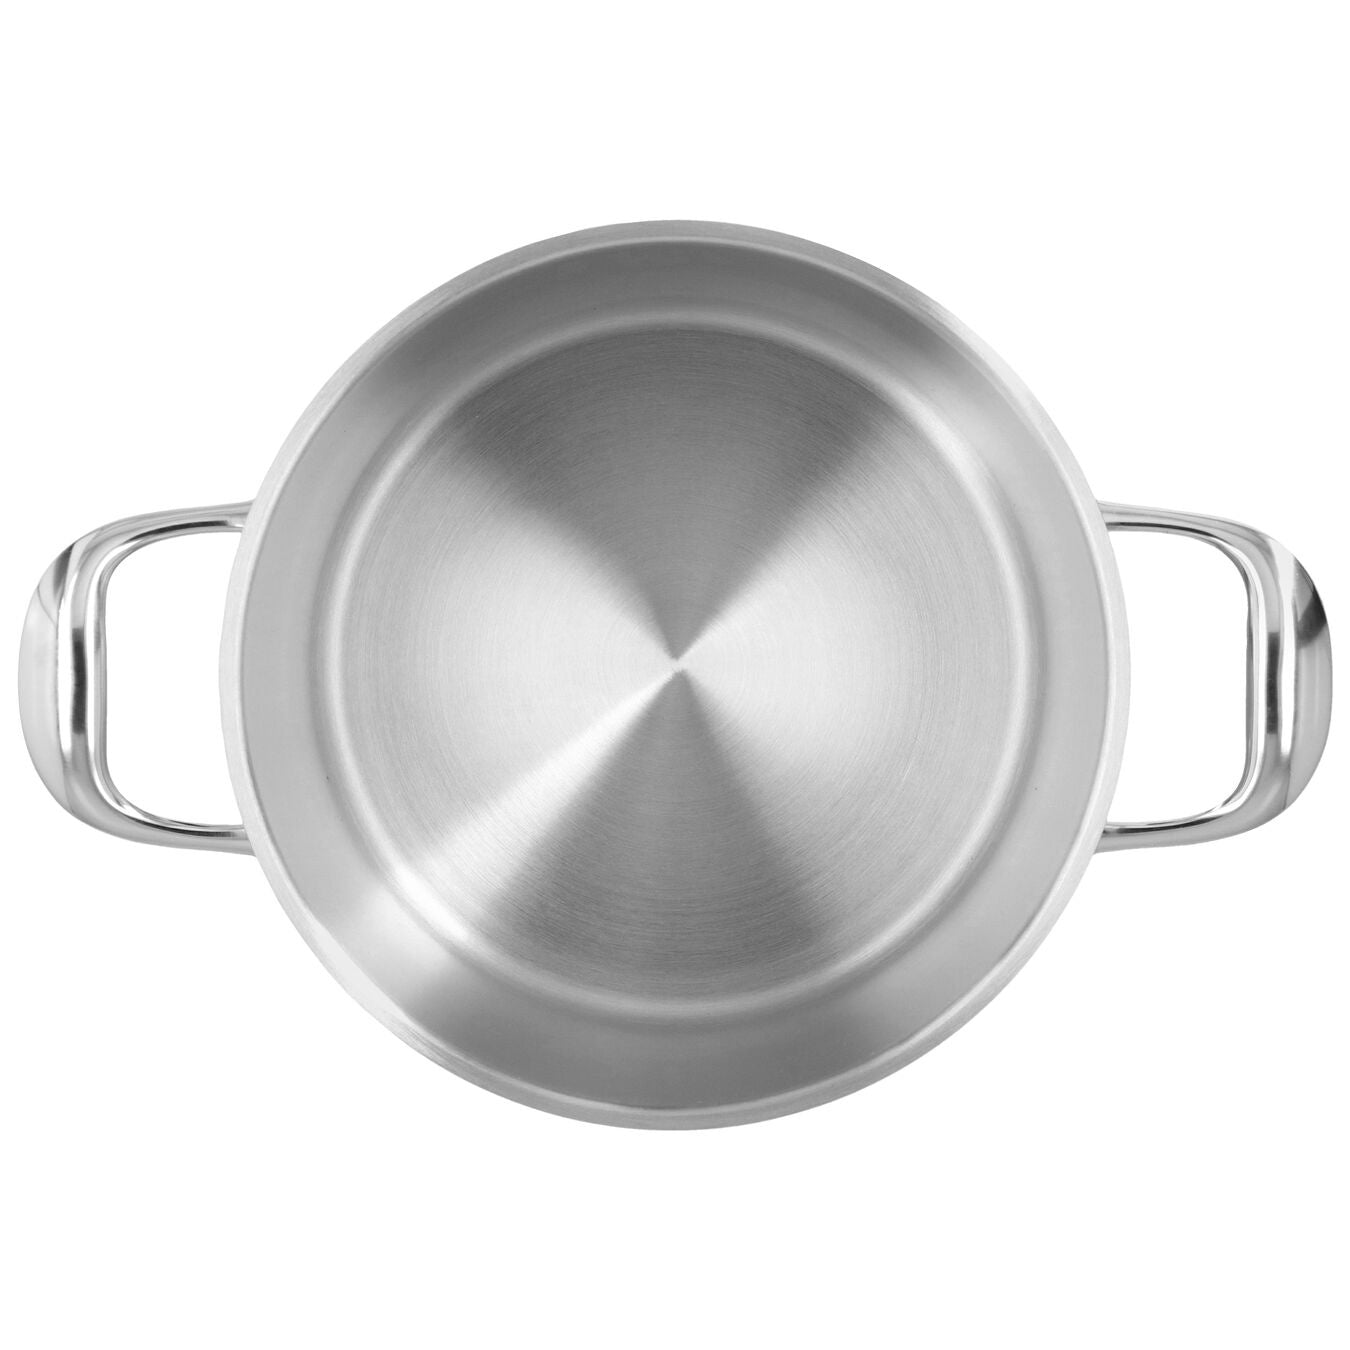 Demeyere Atlantis 7 Collection 5L 18/10 Stainless Steel Stock Pot Top